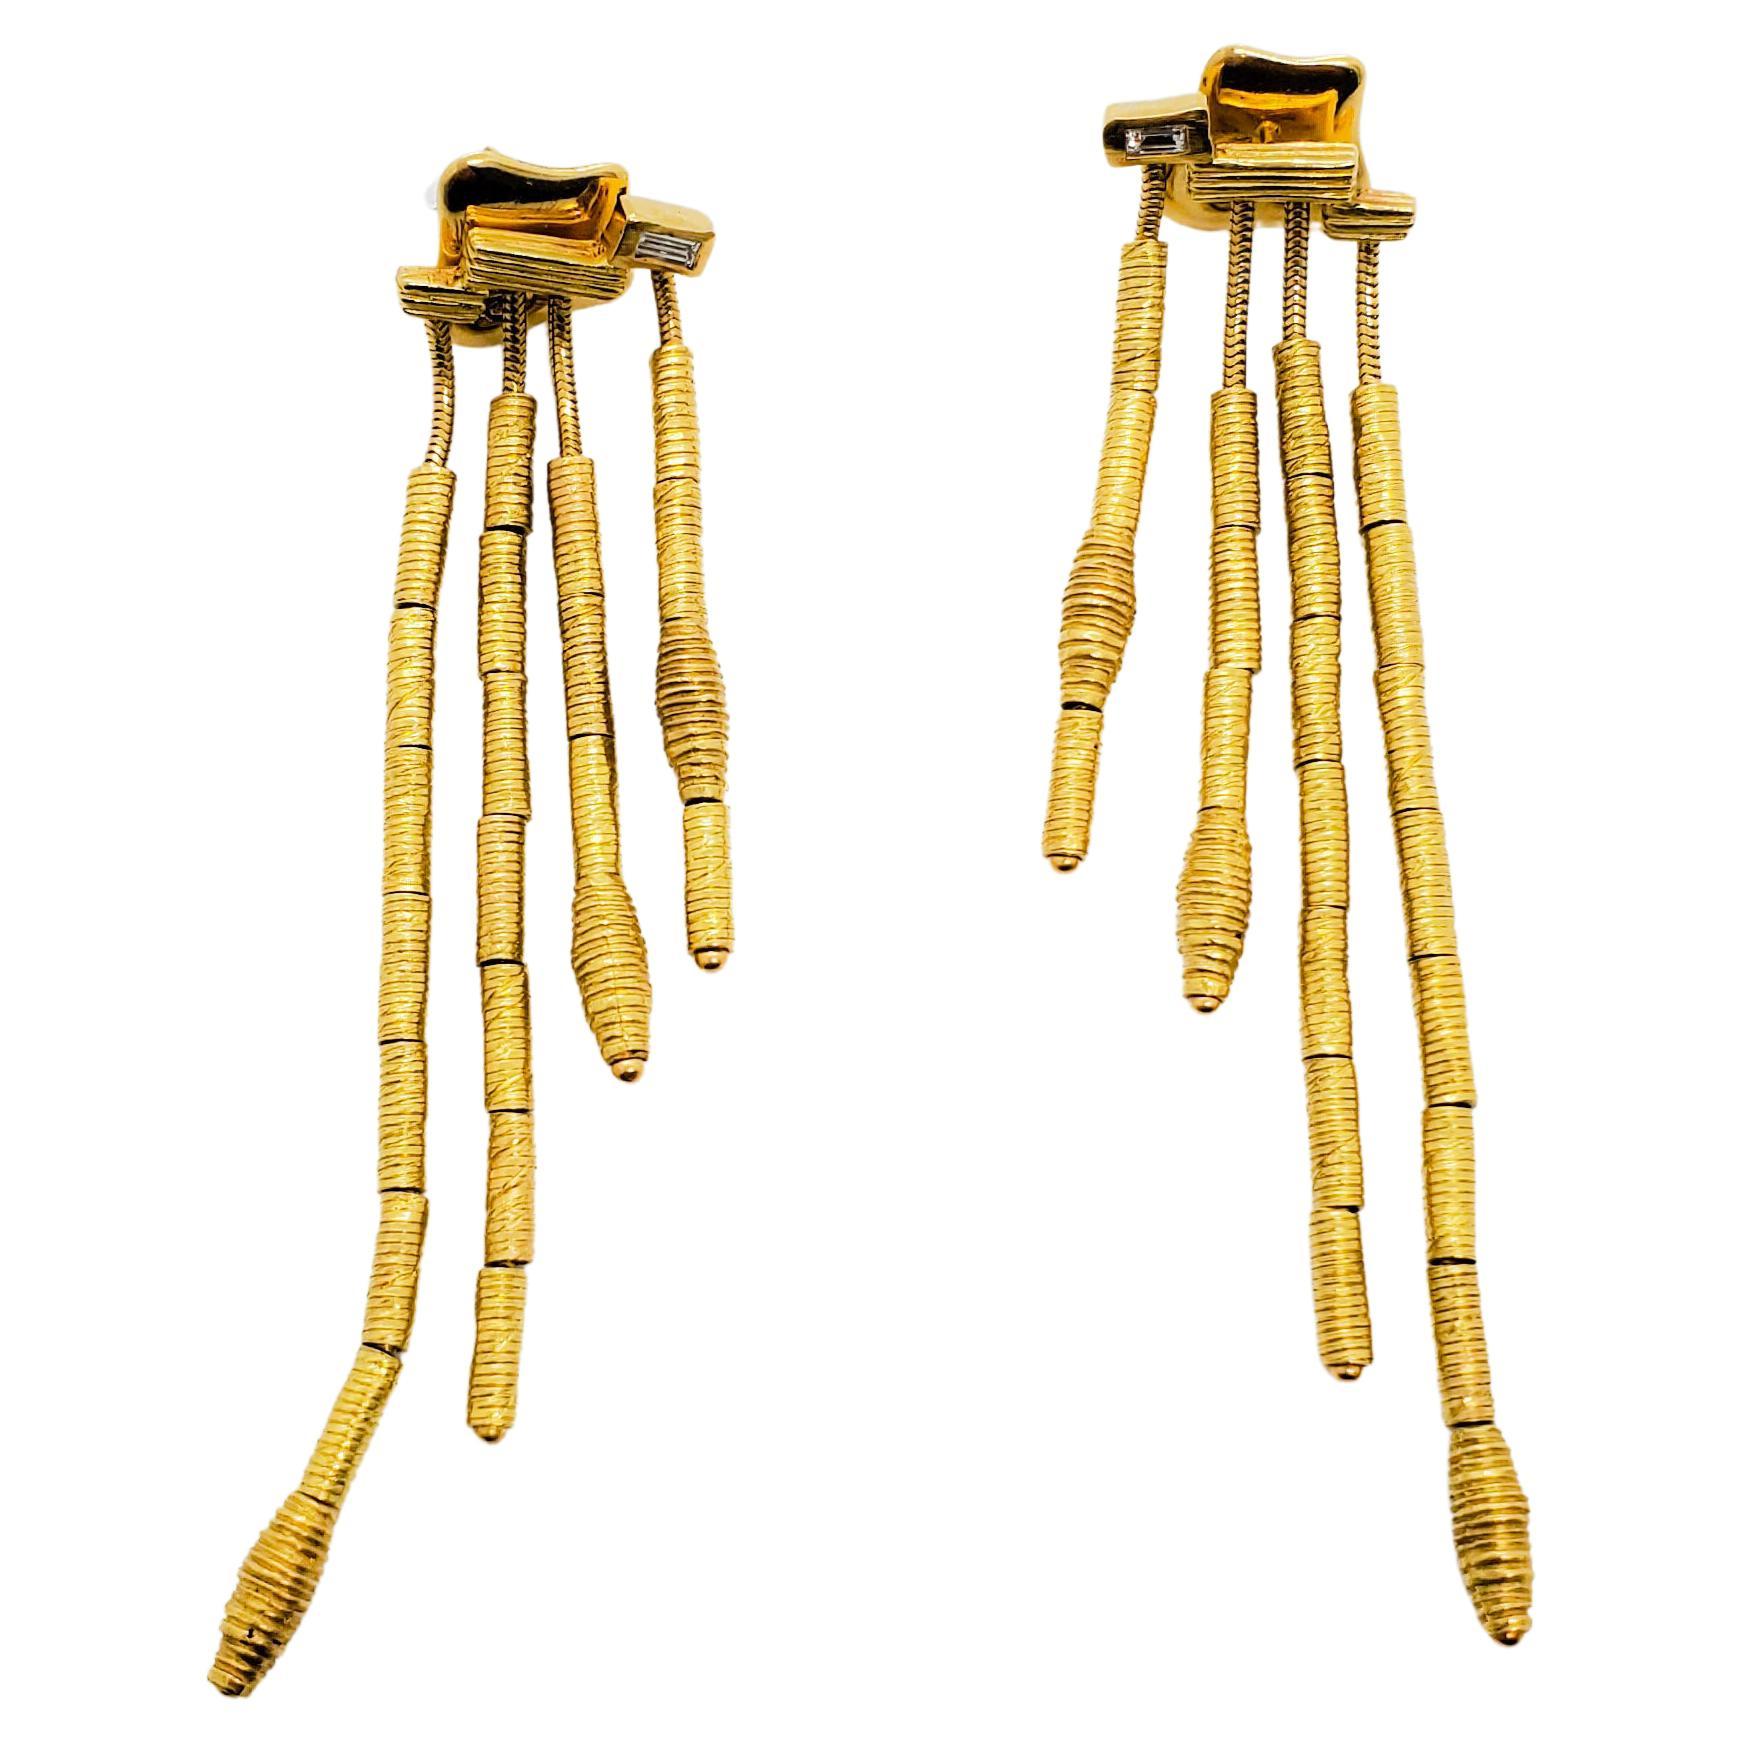 H. Stern Gold and Diamond Dangle Earrings in 18k Yellow Gold